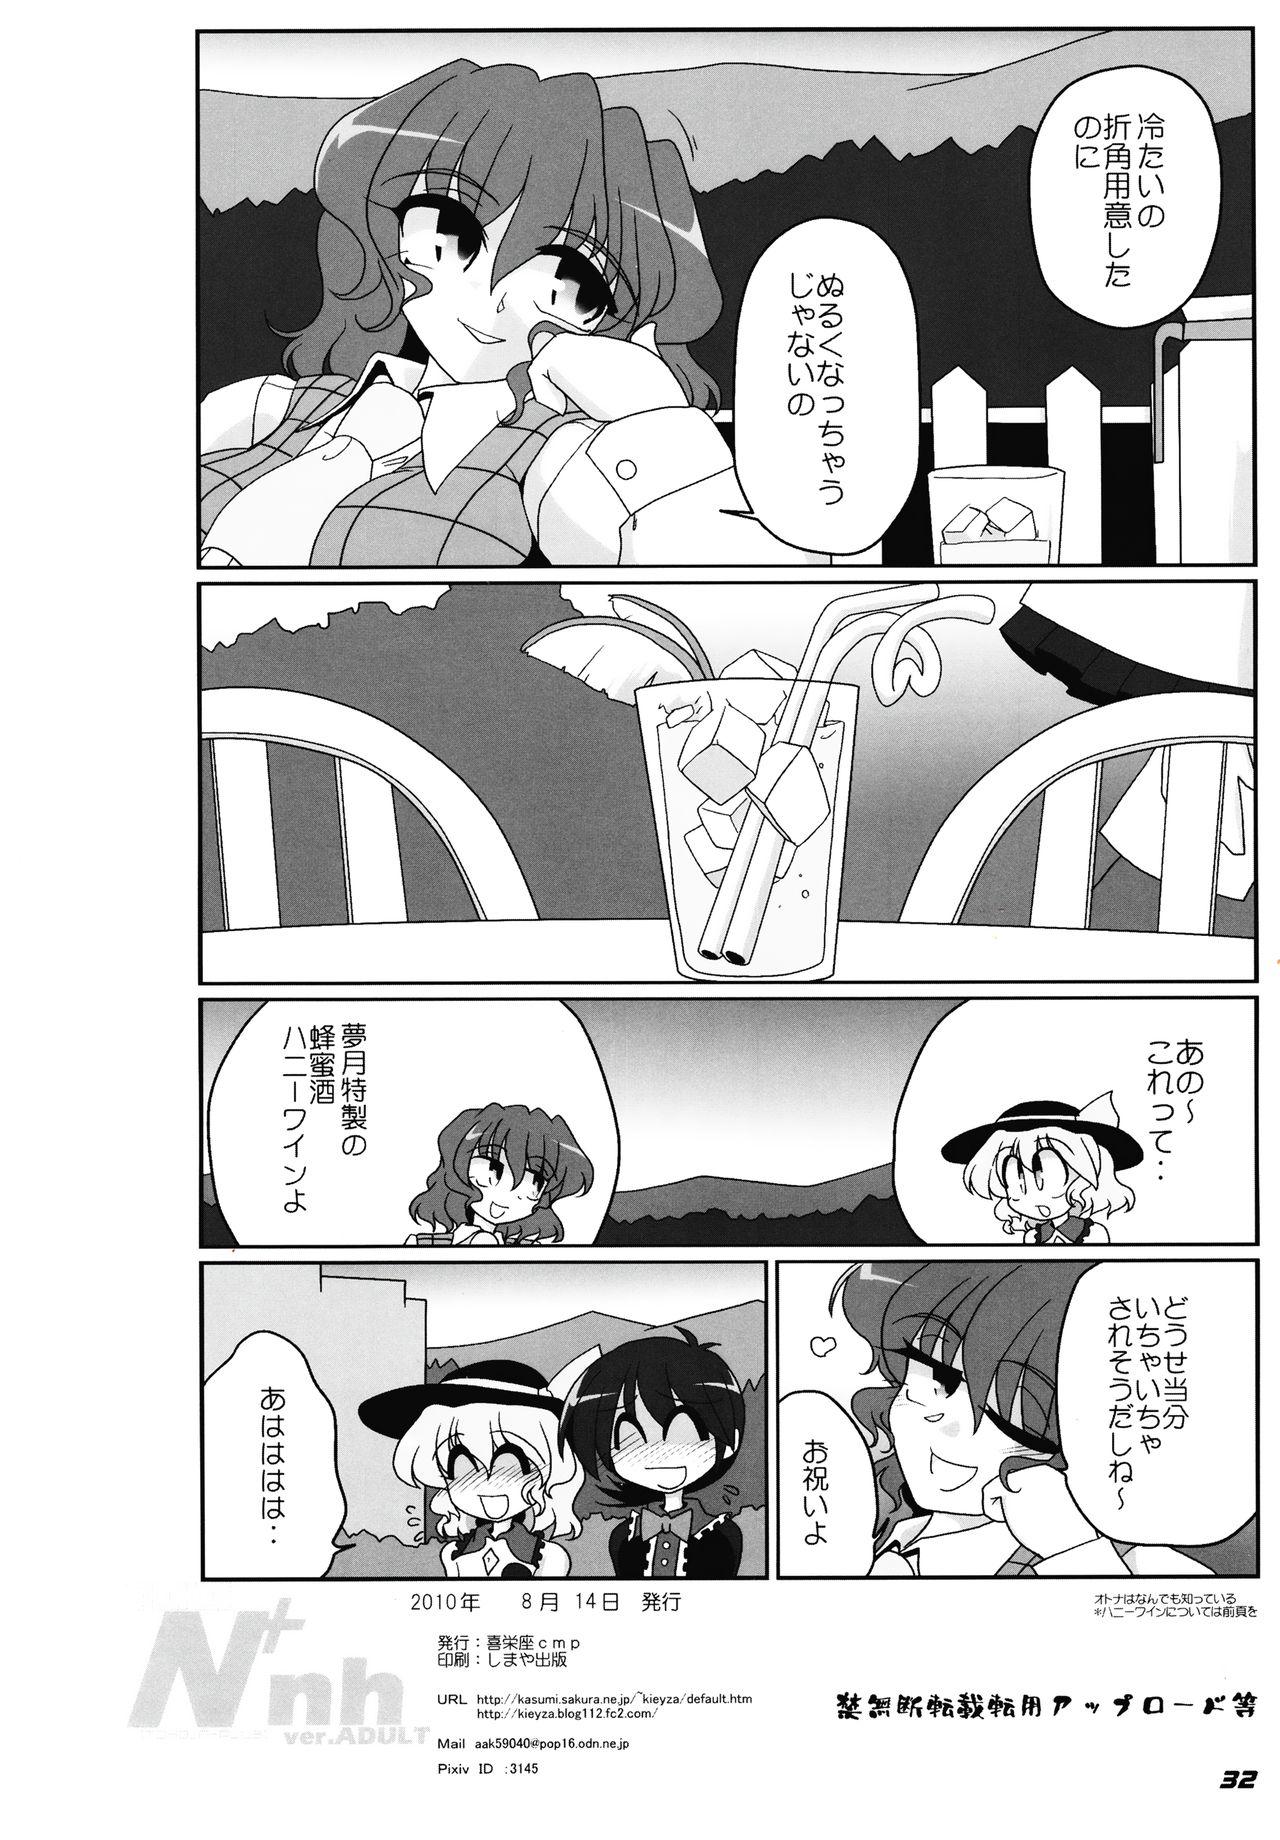 Action TOHO N+ nh ver.ADULT - Touhou project Camgirls - Page 33